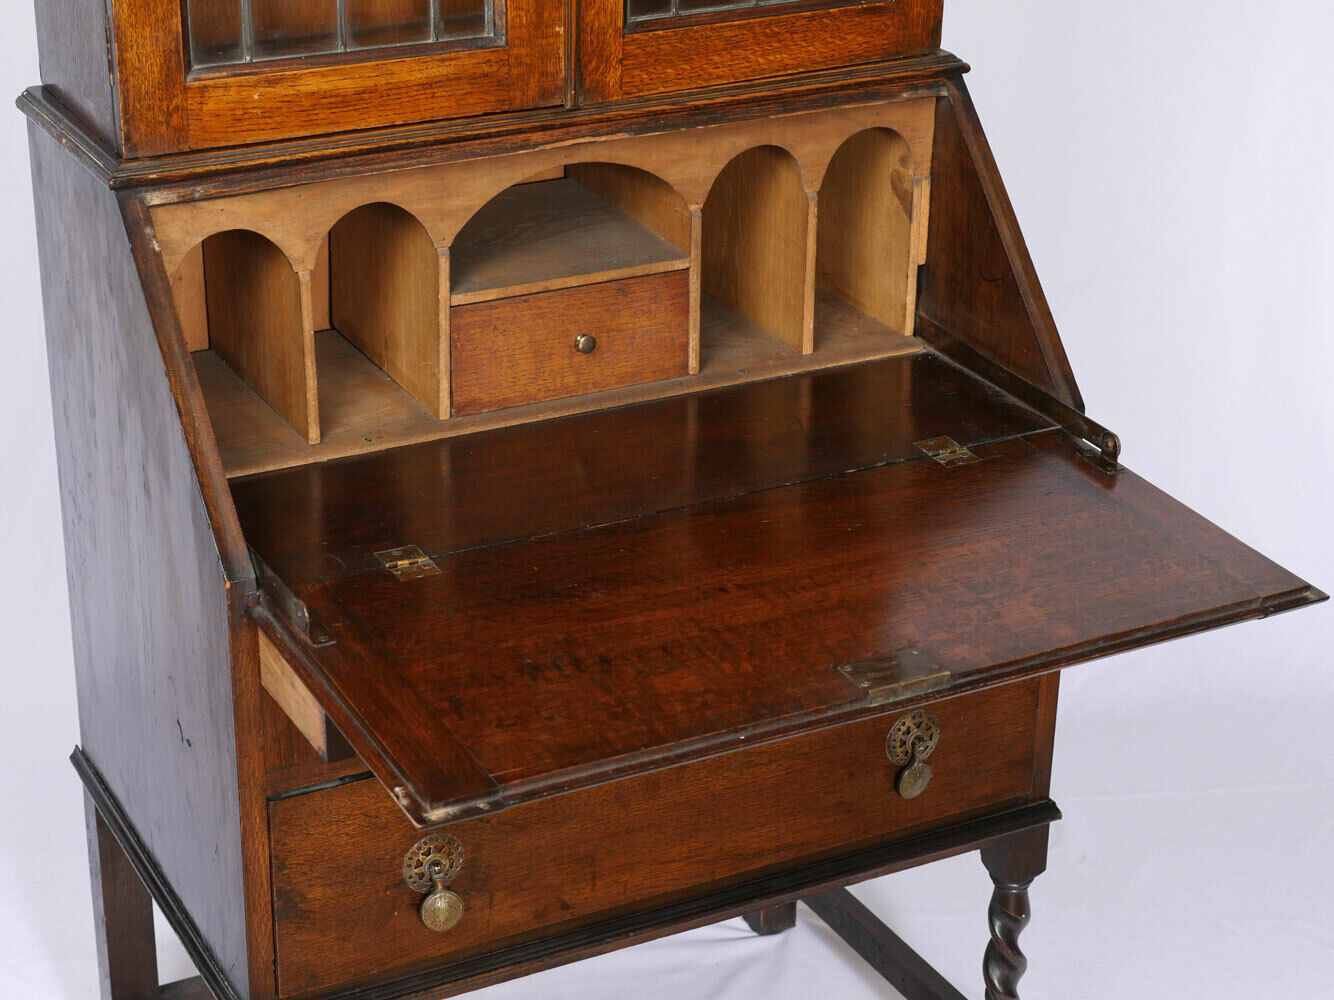 18th / 19th Century English William and Mary Slant Front Desk with Lead Glass Shelves